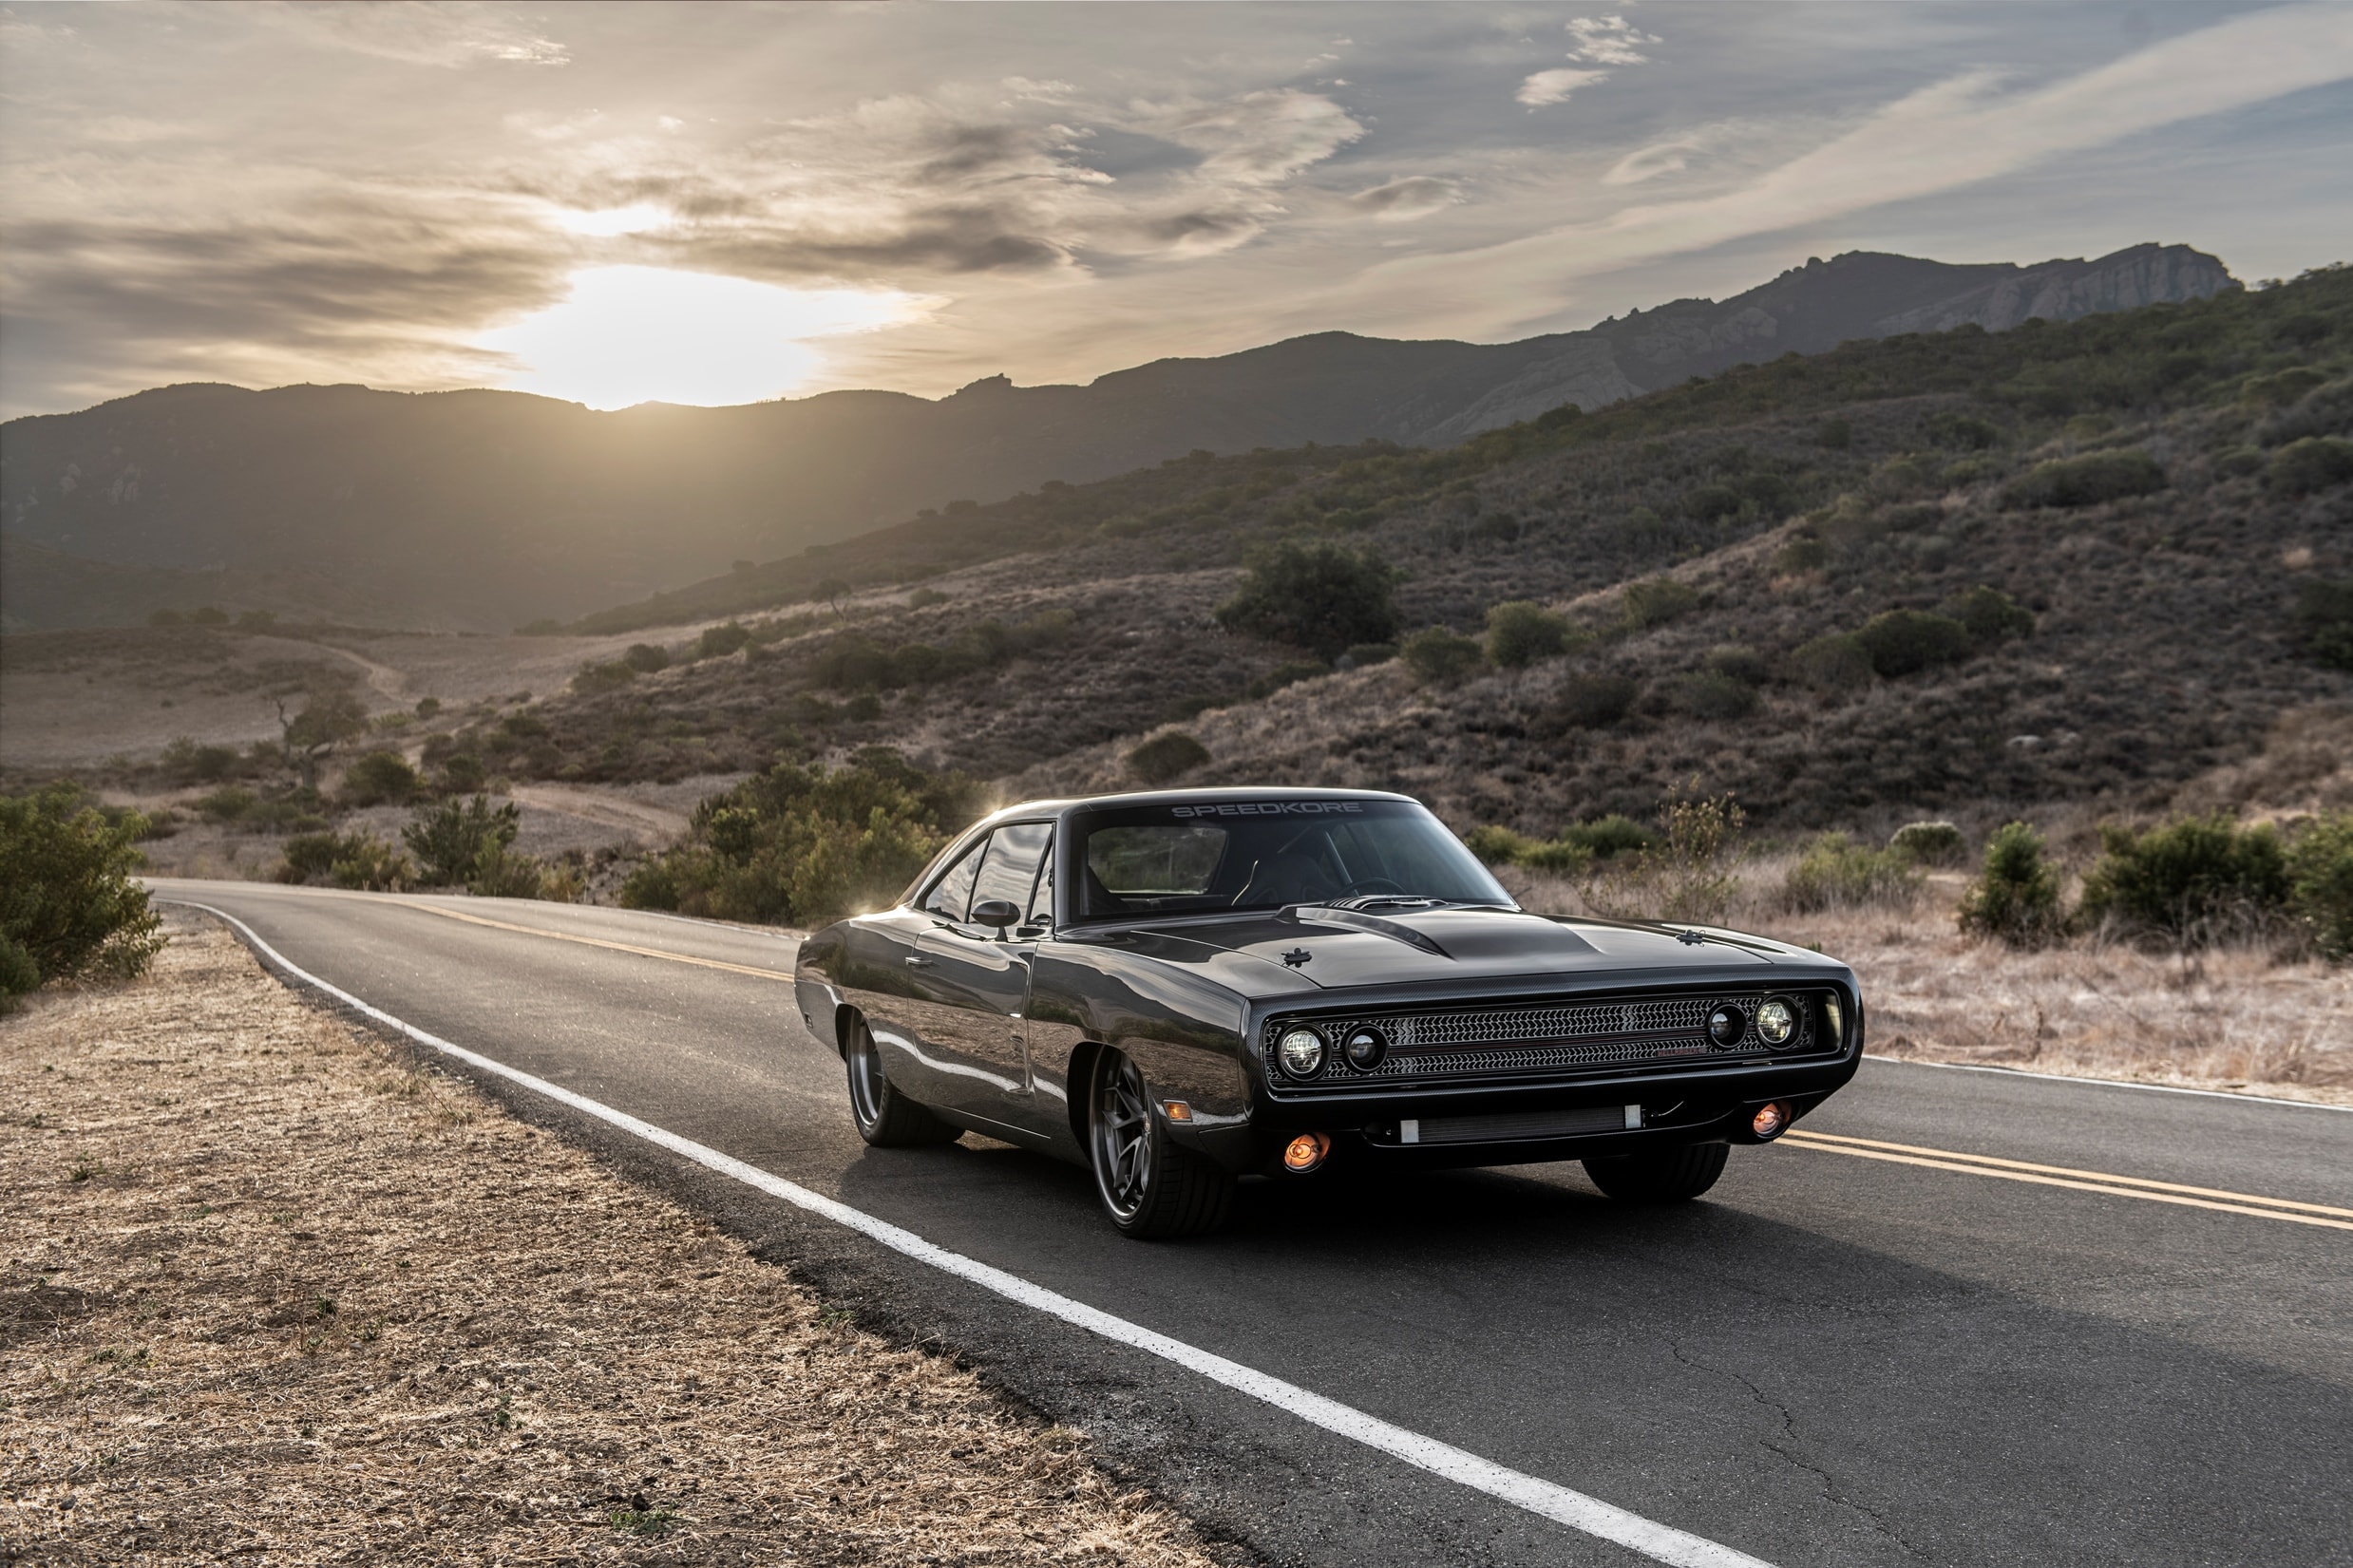 1970 Dodge Charger SpeedKore Hellraiser Boasts 426 Hellephant V8 With  1,000 HP - autoevolution